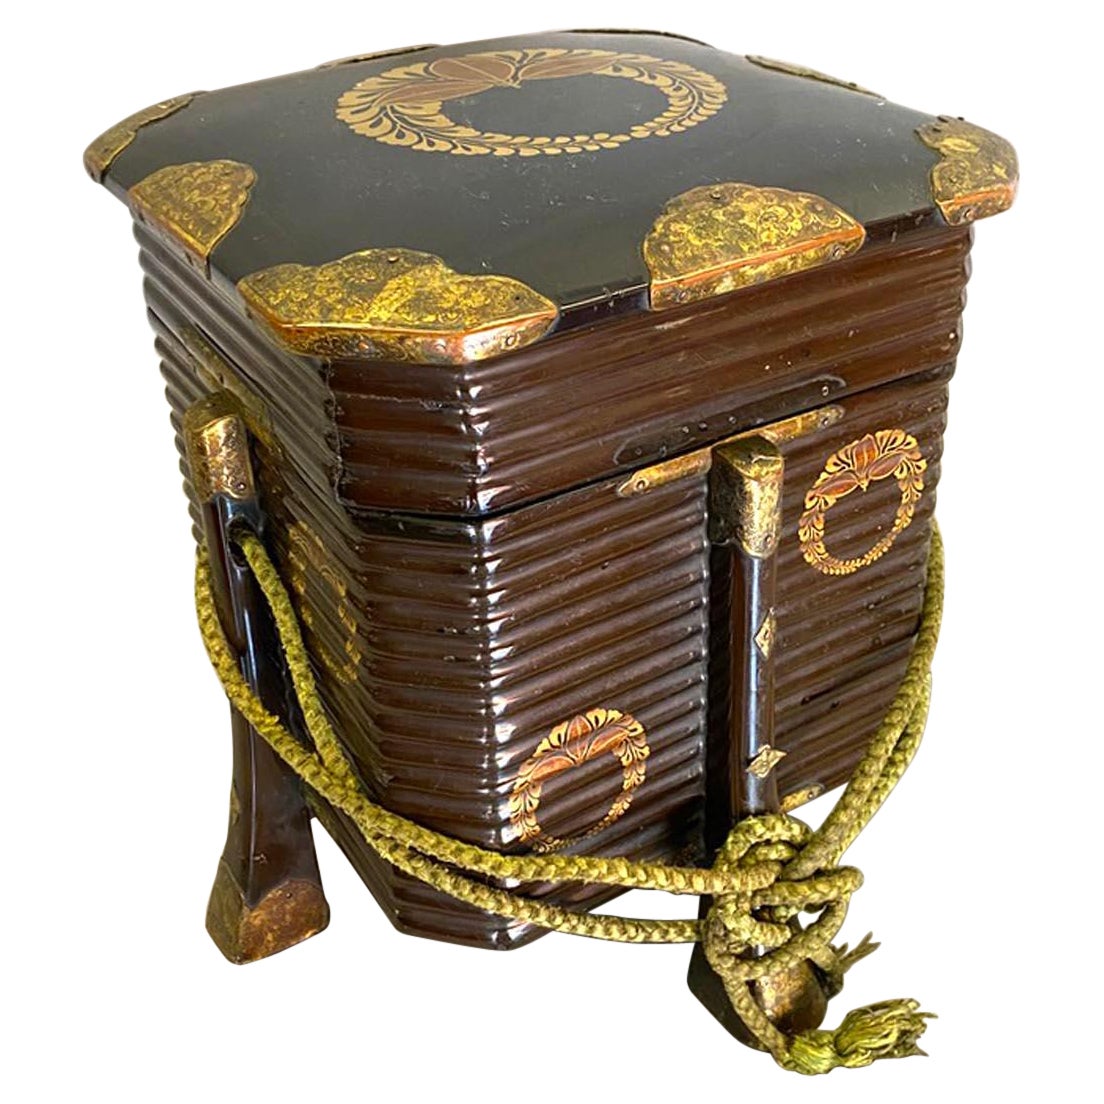 19th Century Japanese Hokkai, Lacquered Decorative Box in Gold and Black